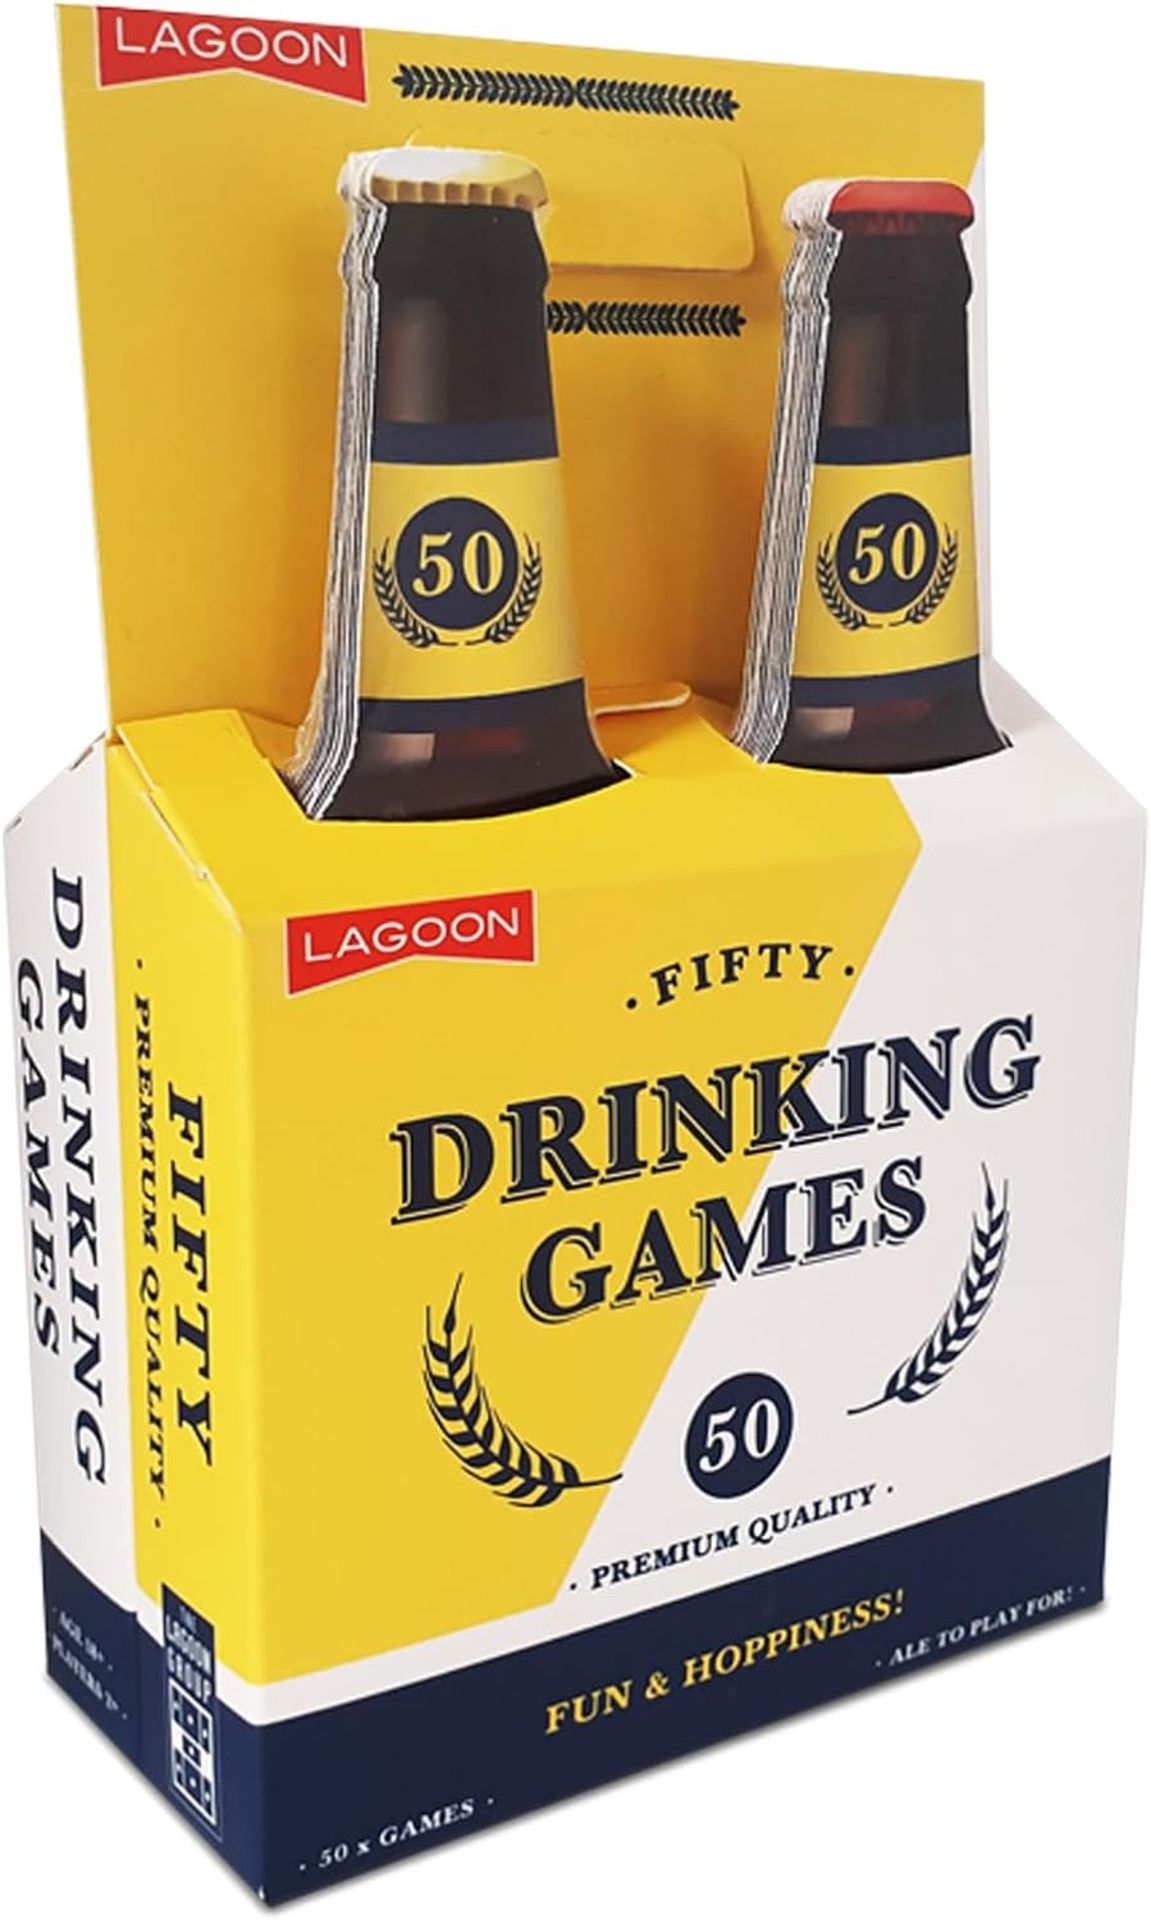 50X NEW FIFTY DRINKING GAMES - Image 3 of 4